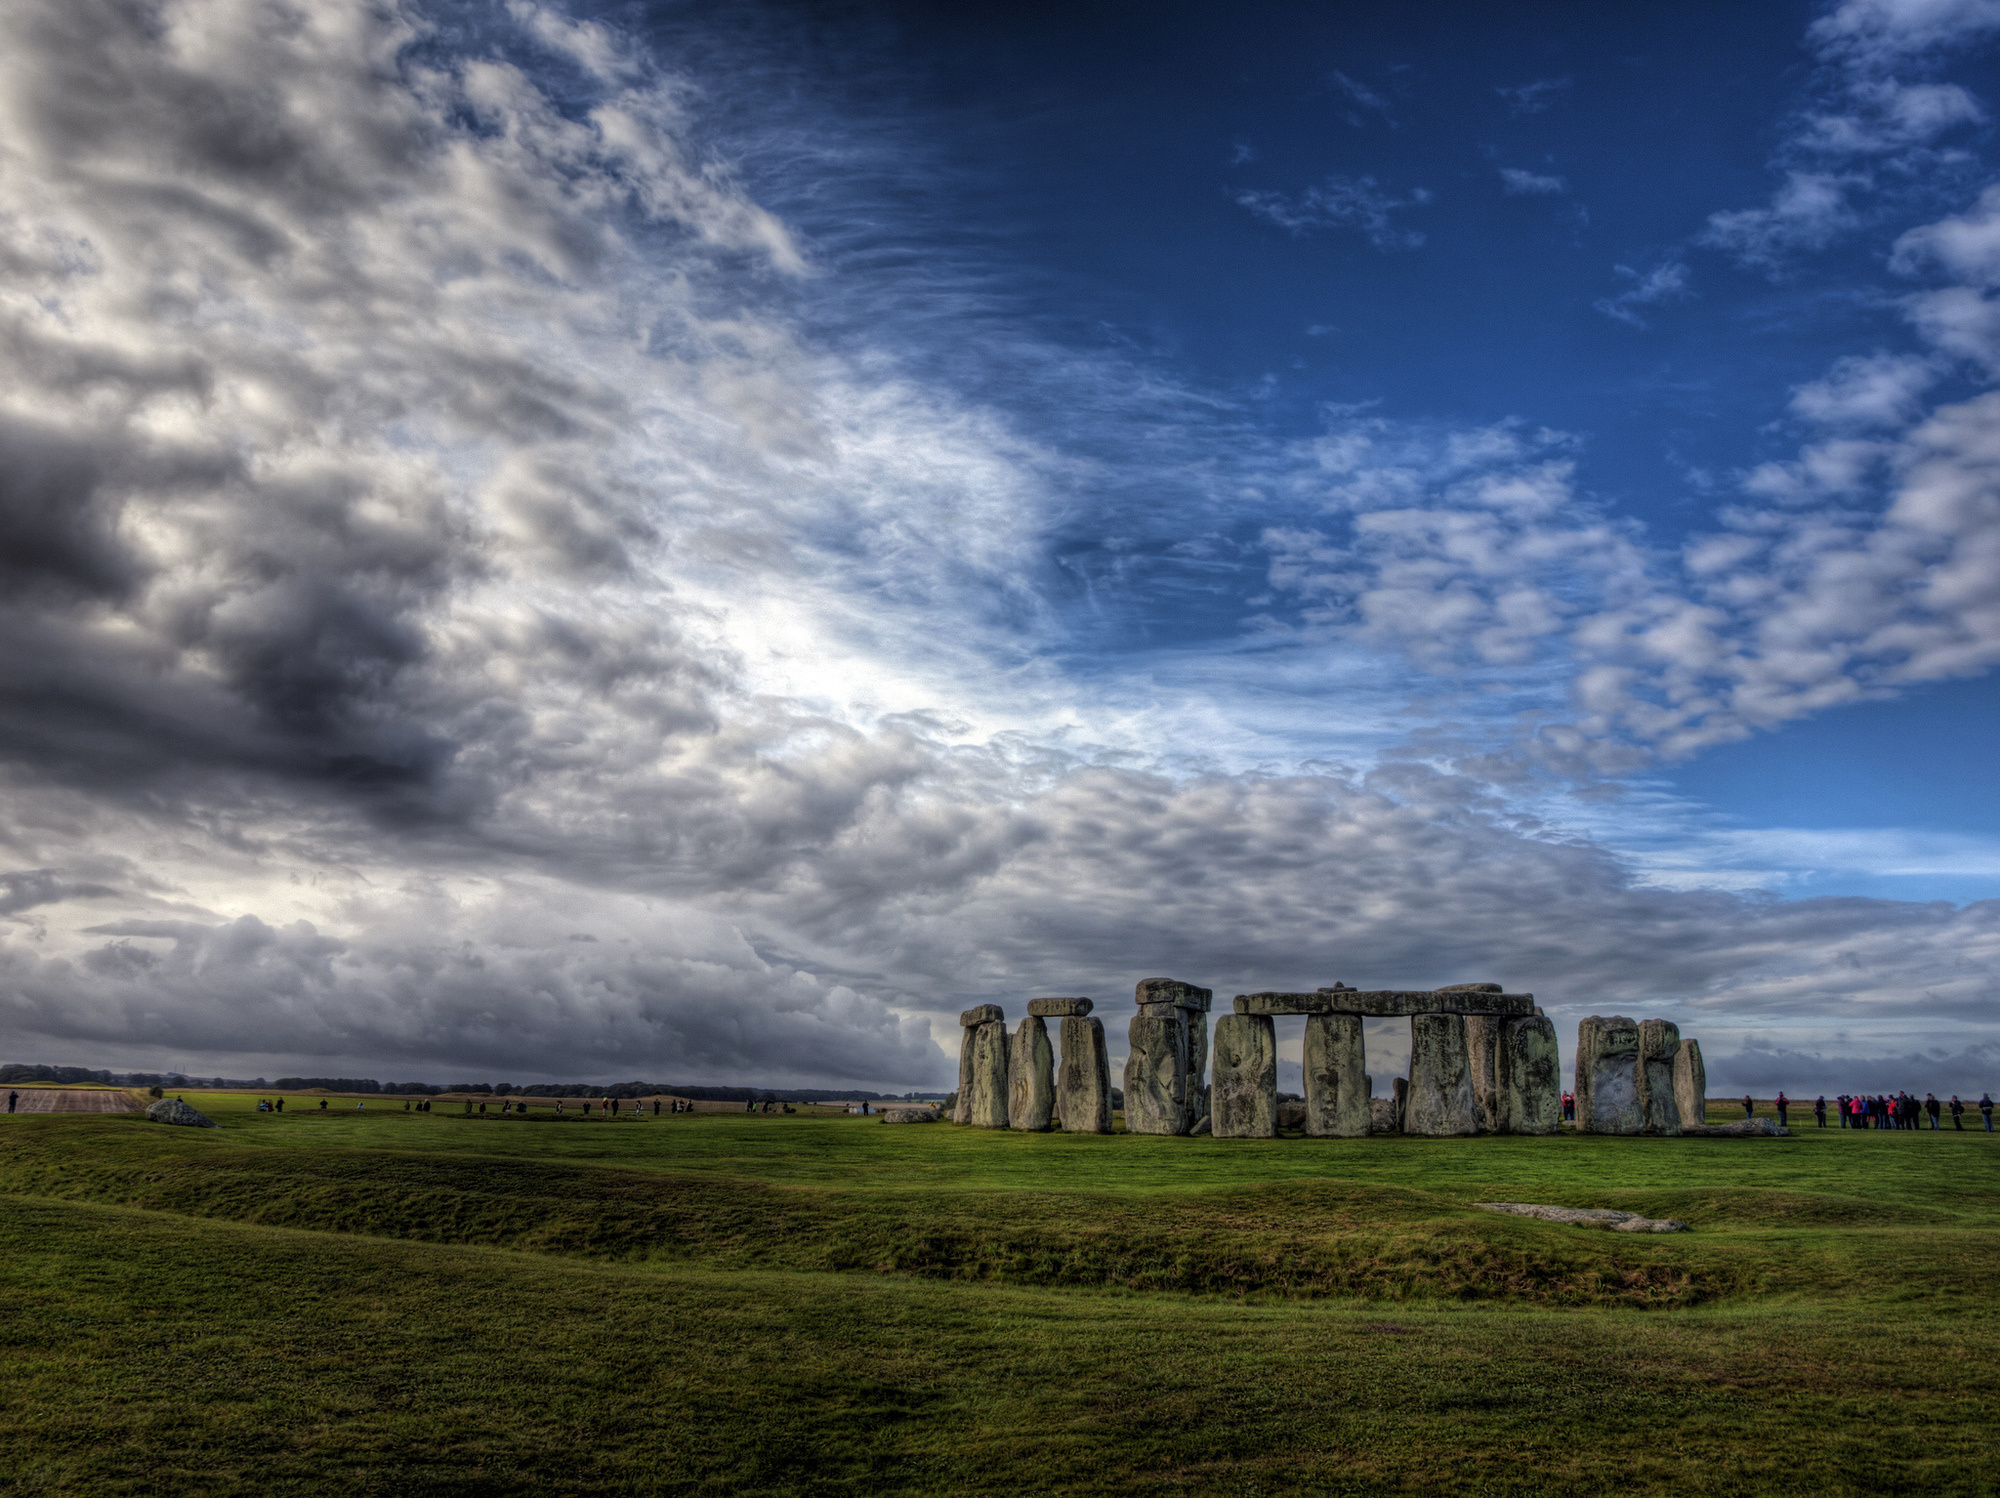 Stonehenge in Wiltshire, England, was built 300 years before the pyramids.